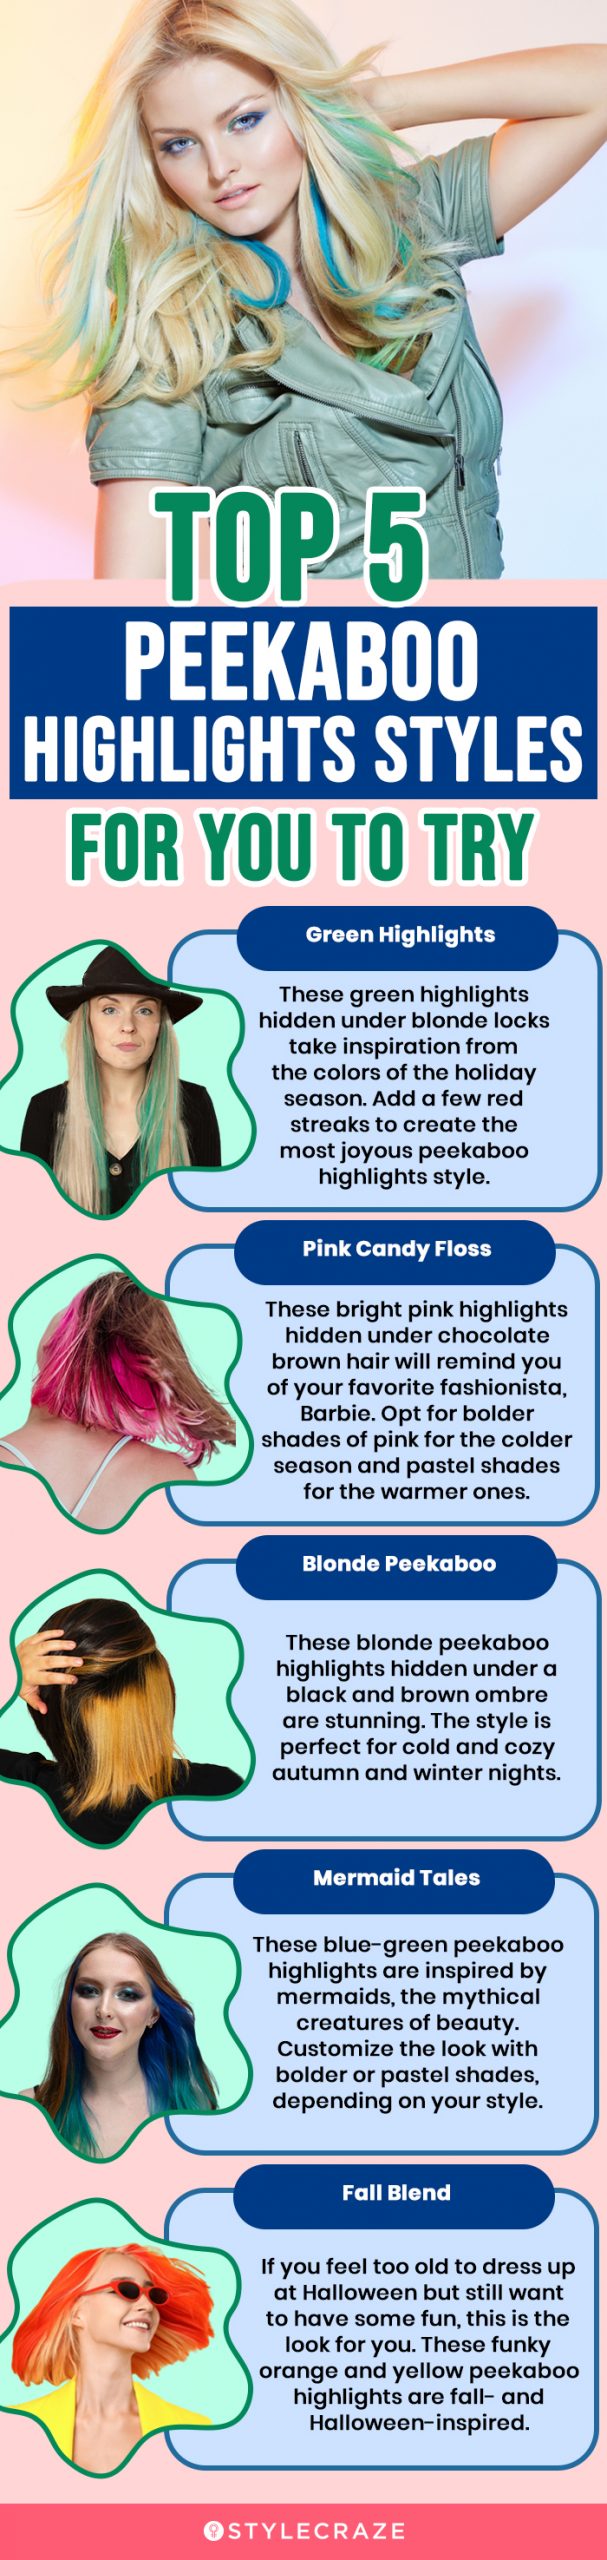 top 5 peekaboo highlights styles for you to try (infographic)